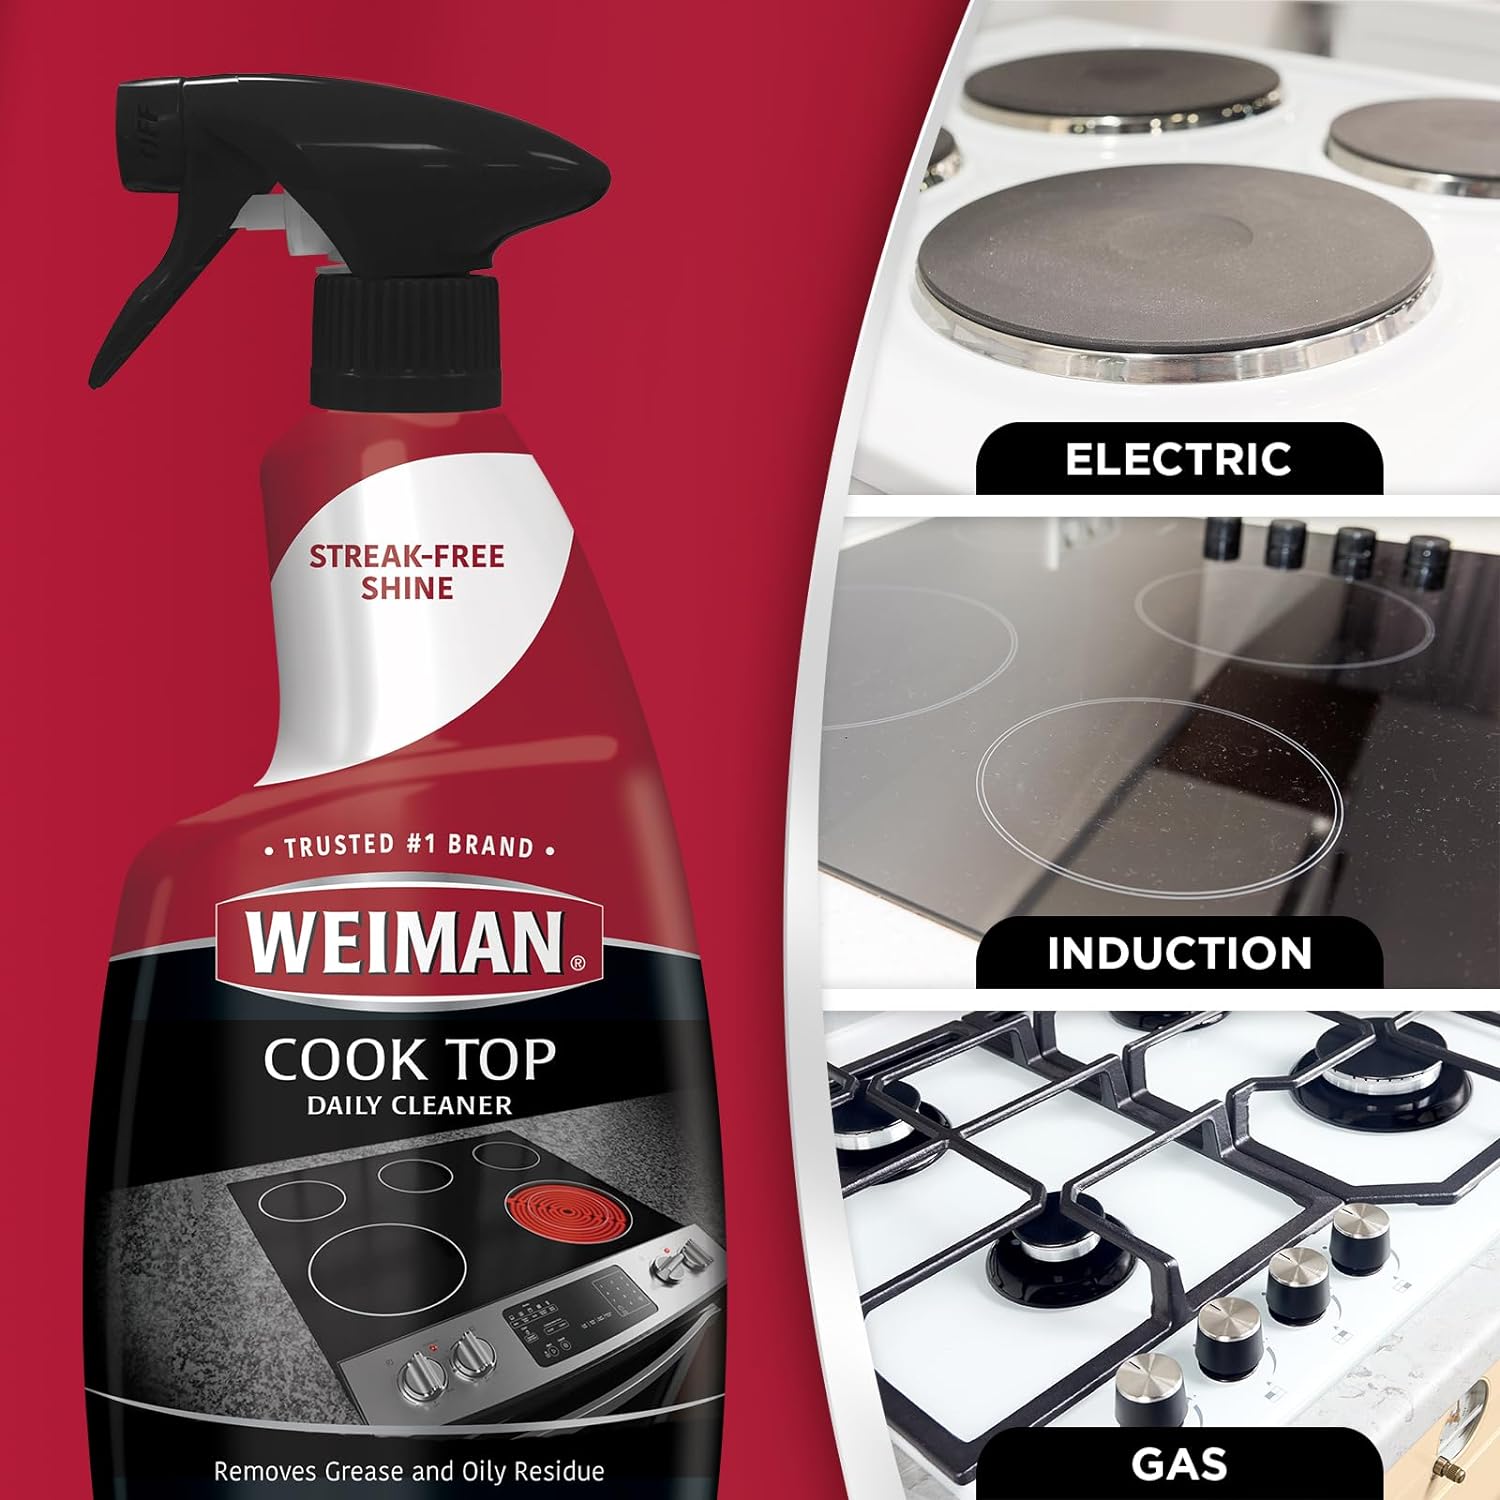 Weiman Cooktop Cleaner for Daily Use (2 Pack) Streak Free, Residue Free, Non-Abrasive Formula - 22 Ounce : Health & Household